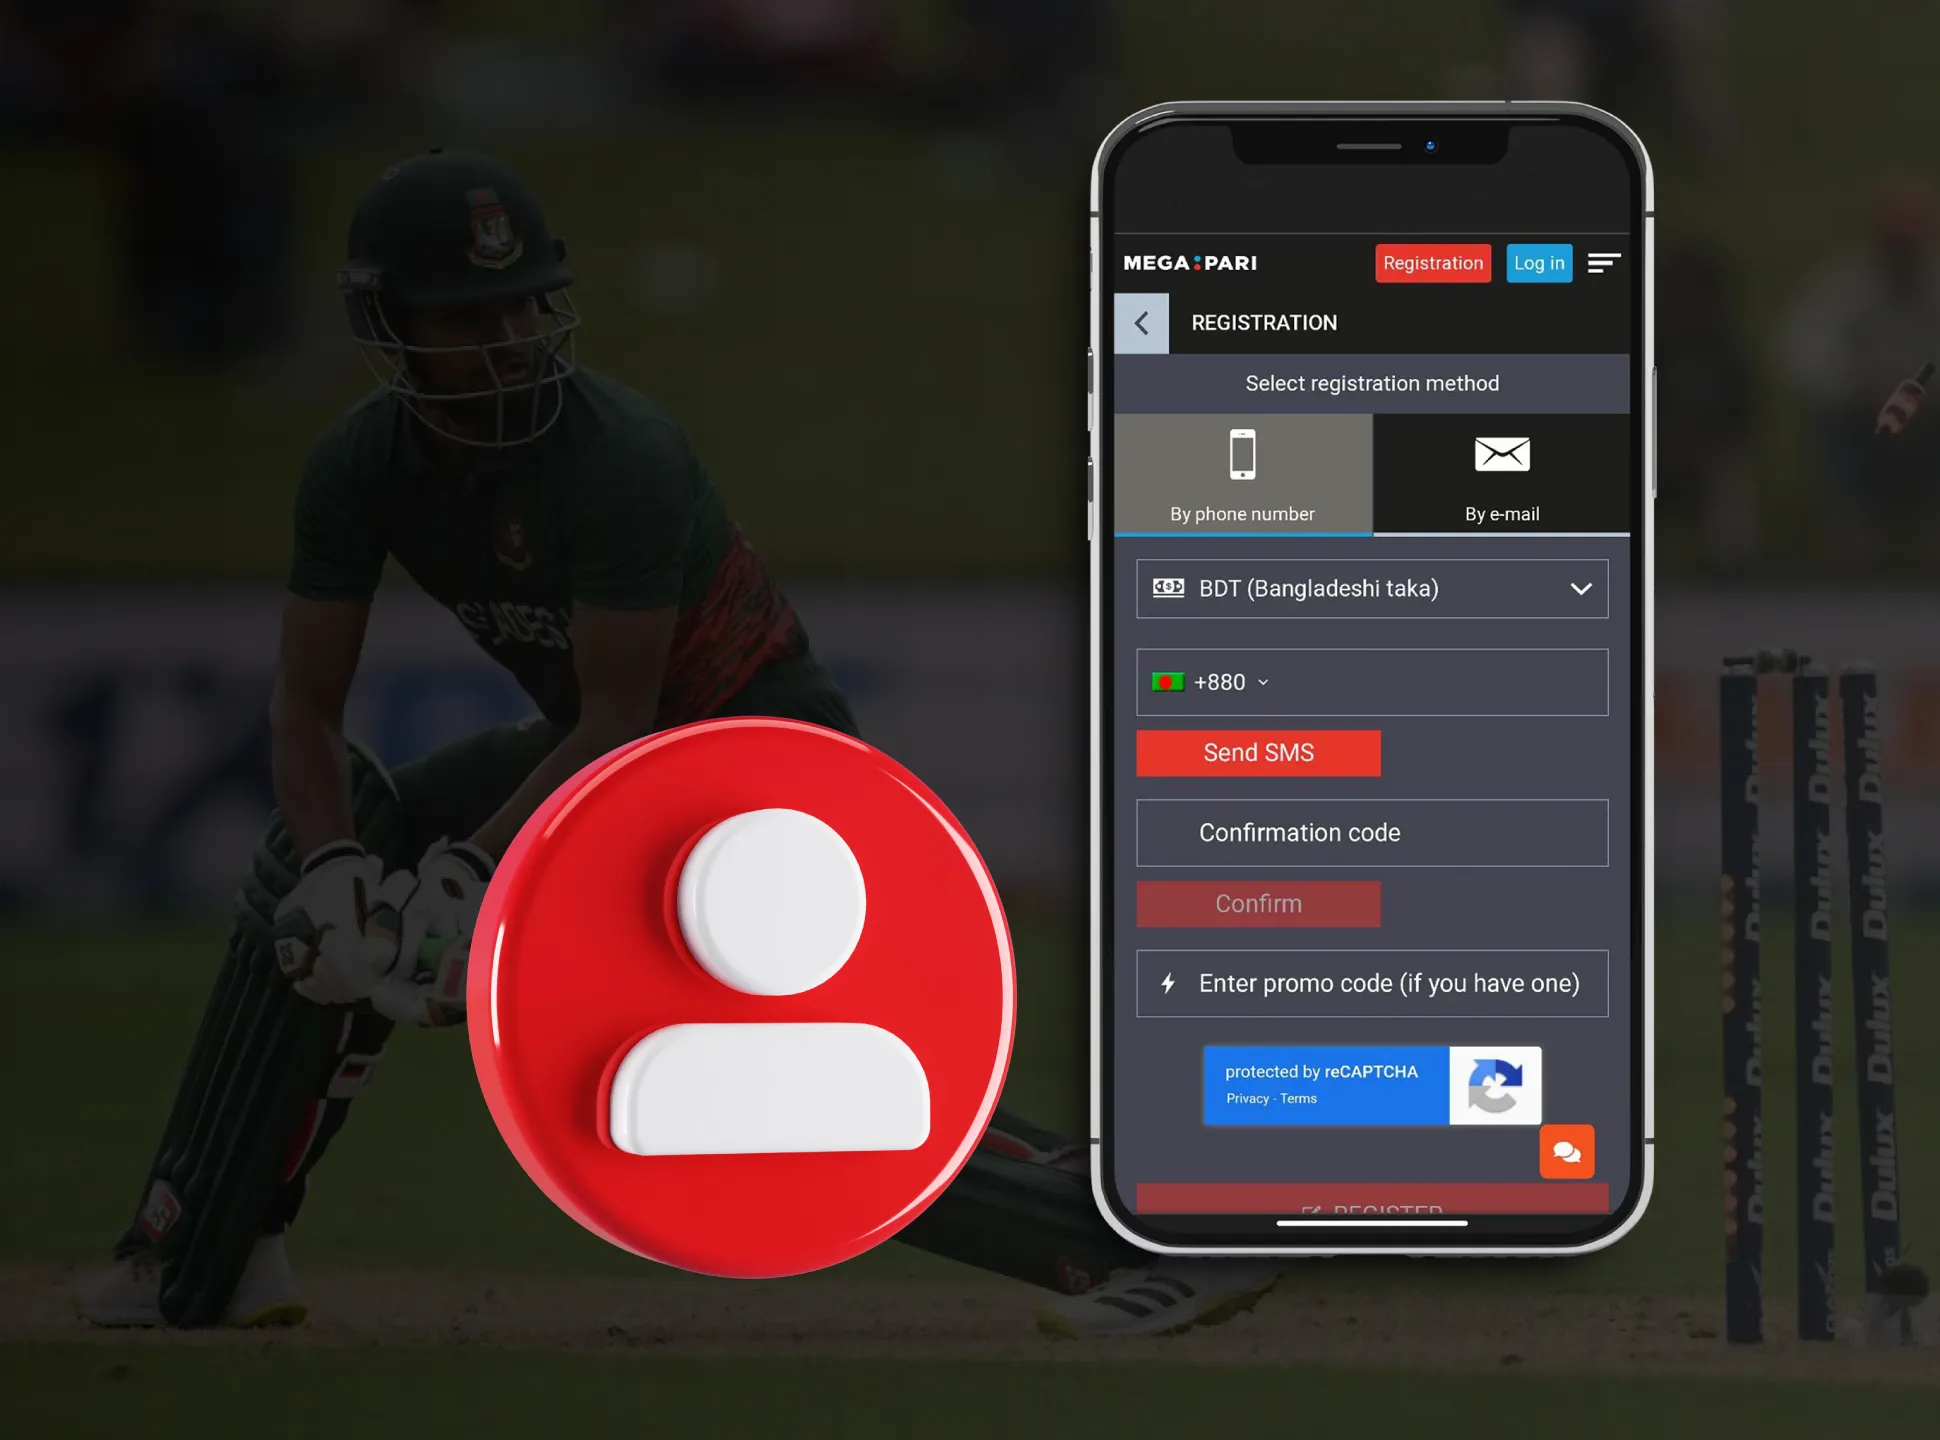 To start betting on cricket, register on the bookmaker's website.